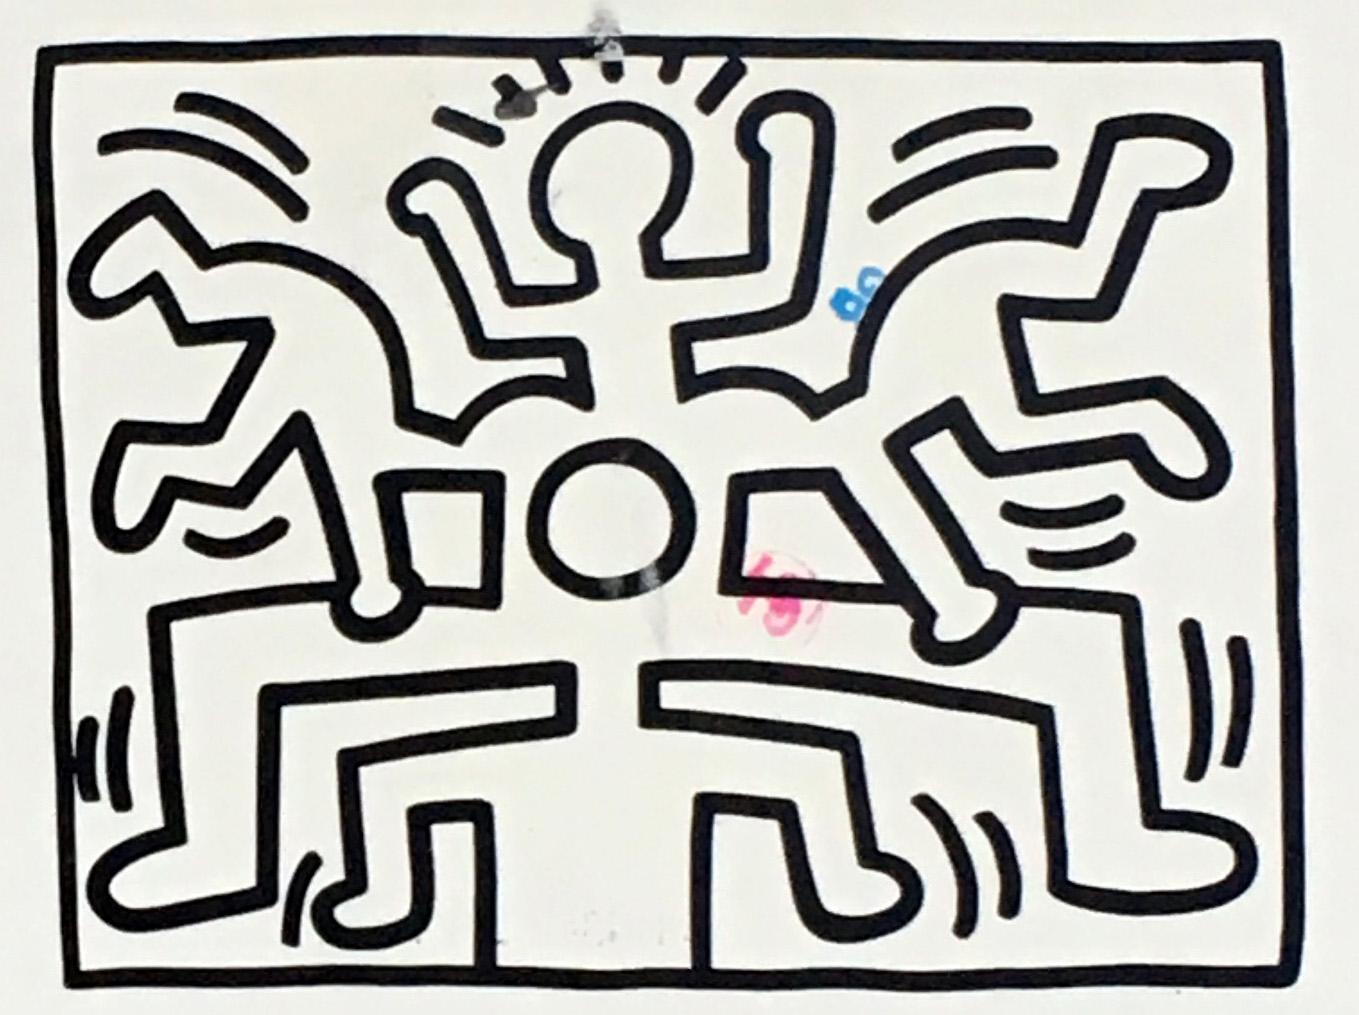 1980s Keith Haring announcement card (Vintage Keith Haring)  - Print by (after) Keith Haring